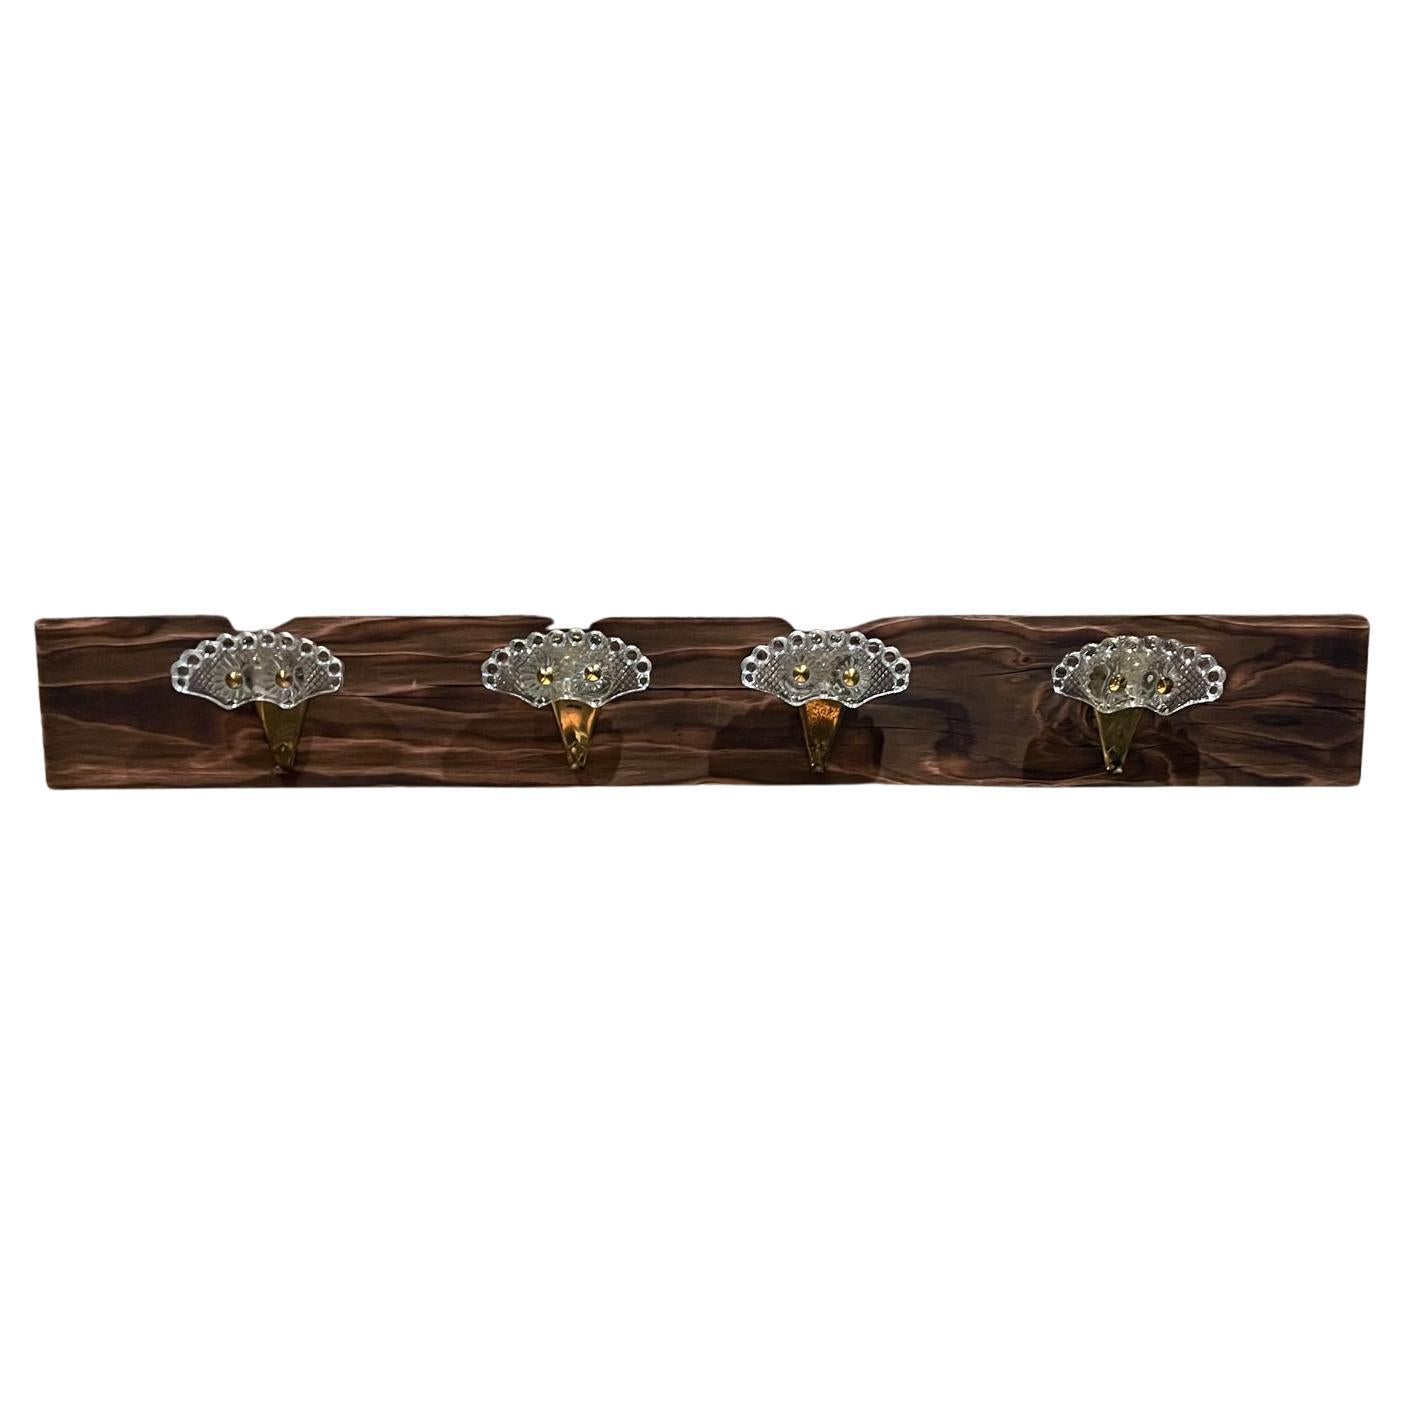 Elegant Italian art glass and brass coat hat rack hooks set of four
Style of Fontana Arte, unmarked.
With wood 5.25 x 40 W x 3.5 D
Each hook is 2 D x 5 W x 4.25 tall
Preowned original vintage condition.
Selling Hooks only. Wood is for